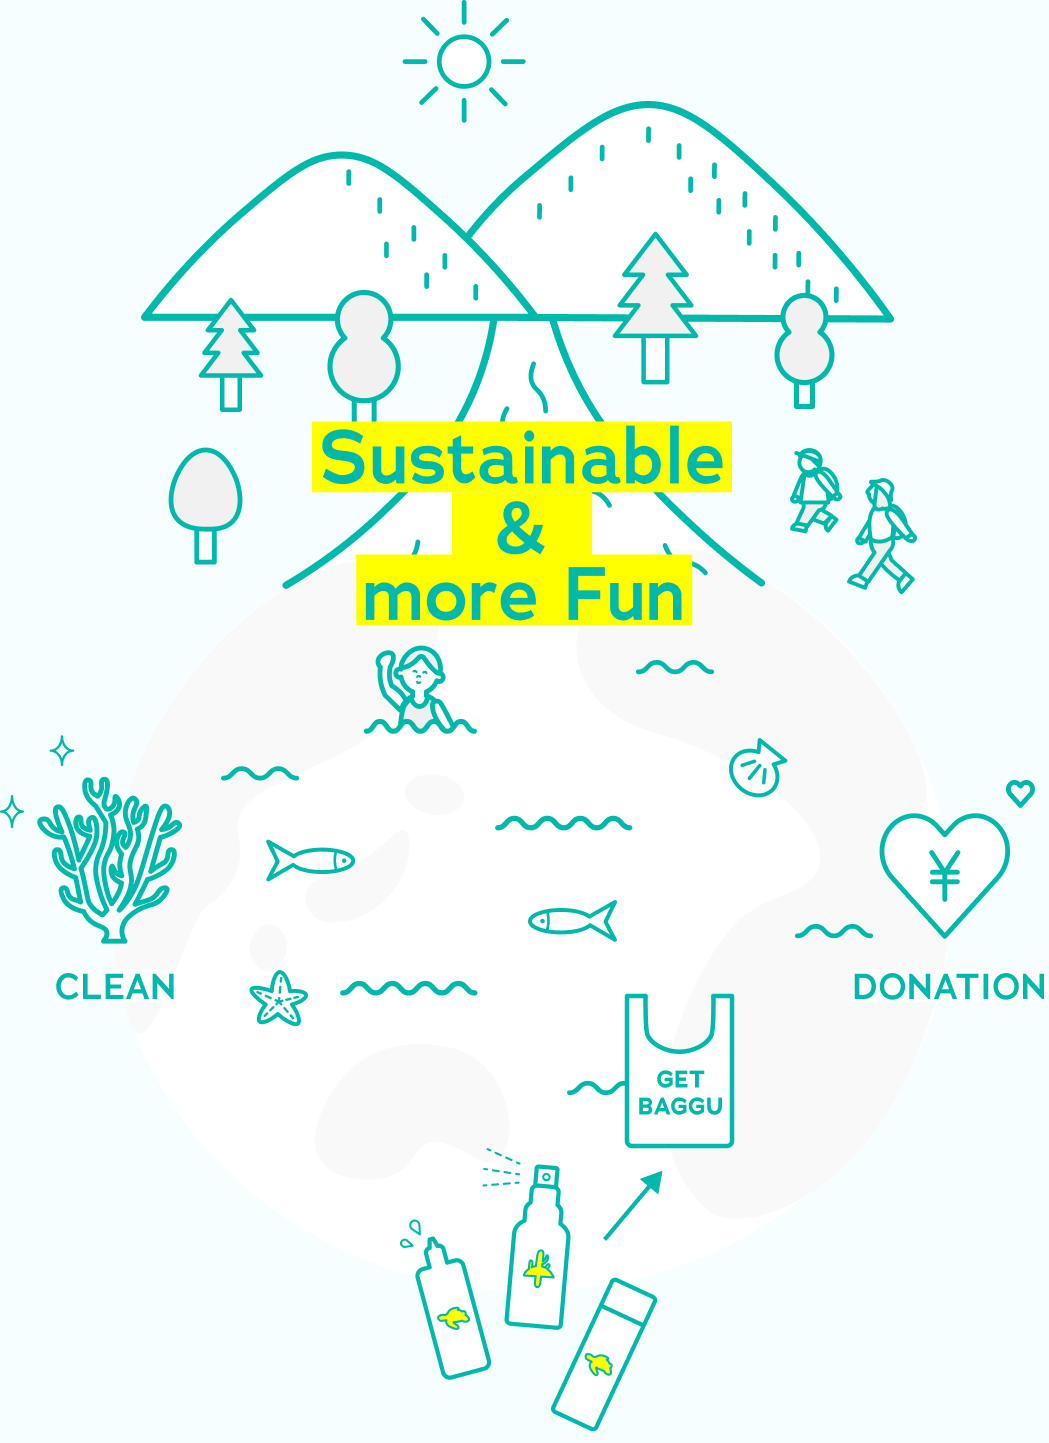 Sustainable & more Fun